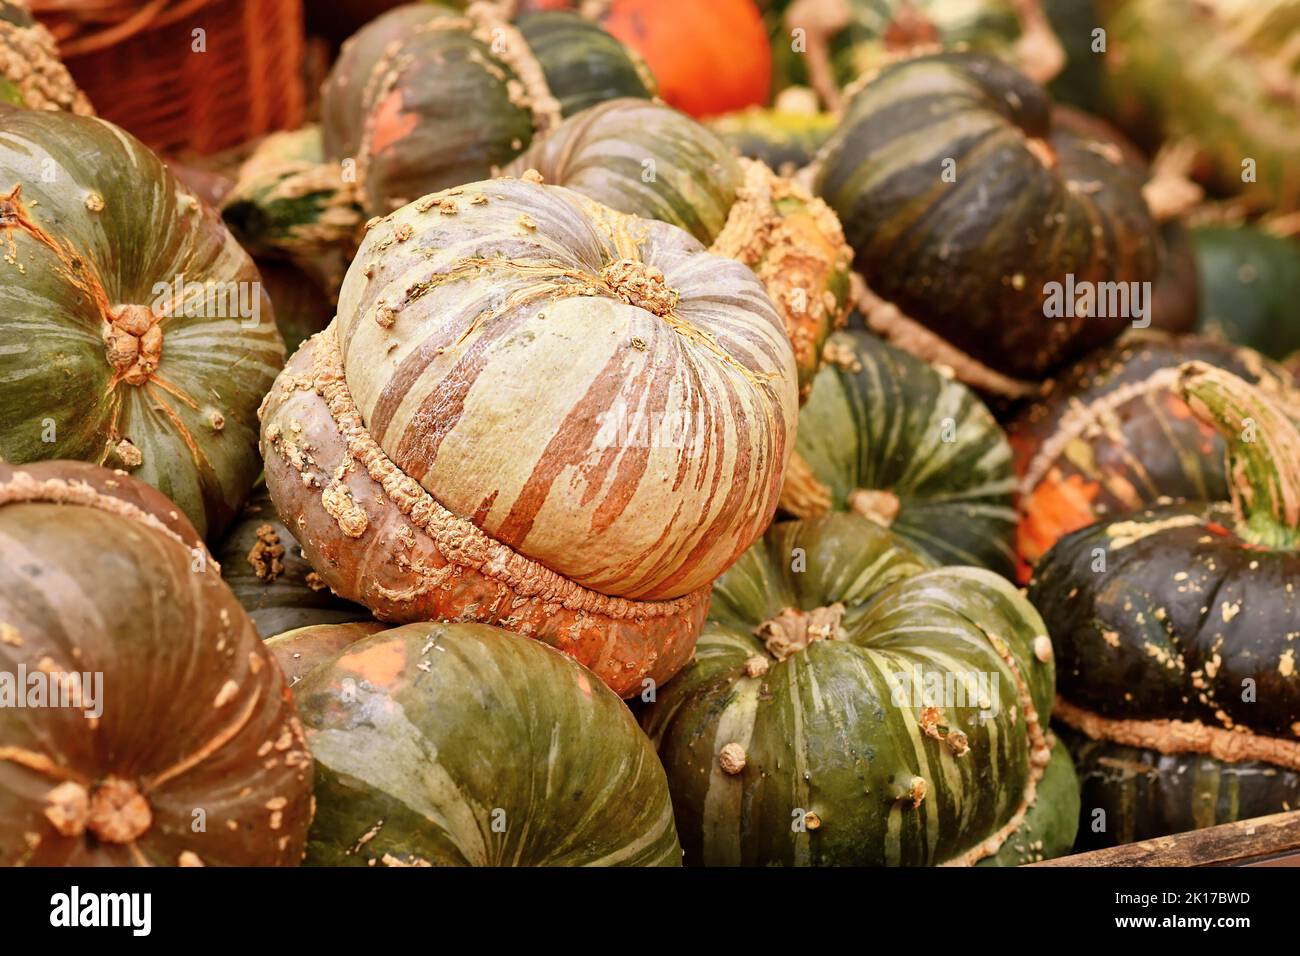 Cream and brown colored Turban squash with warts on skin on pile Stock Photo